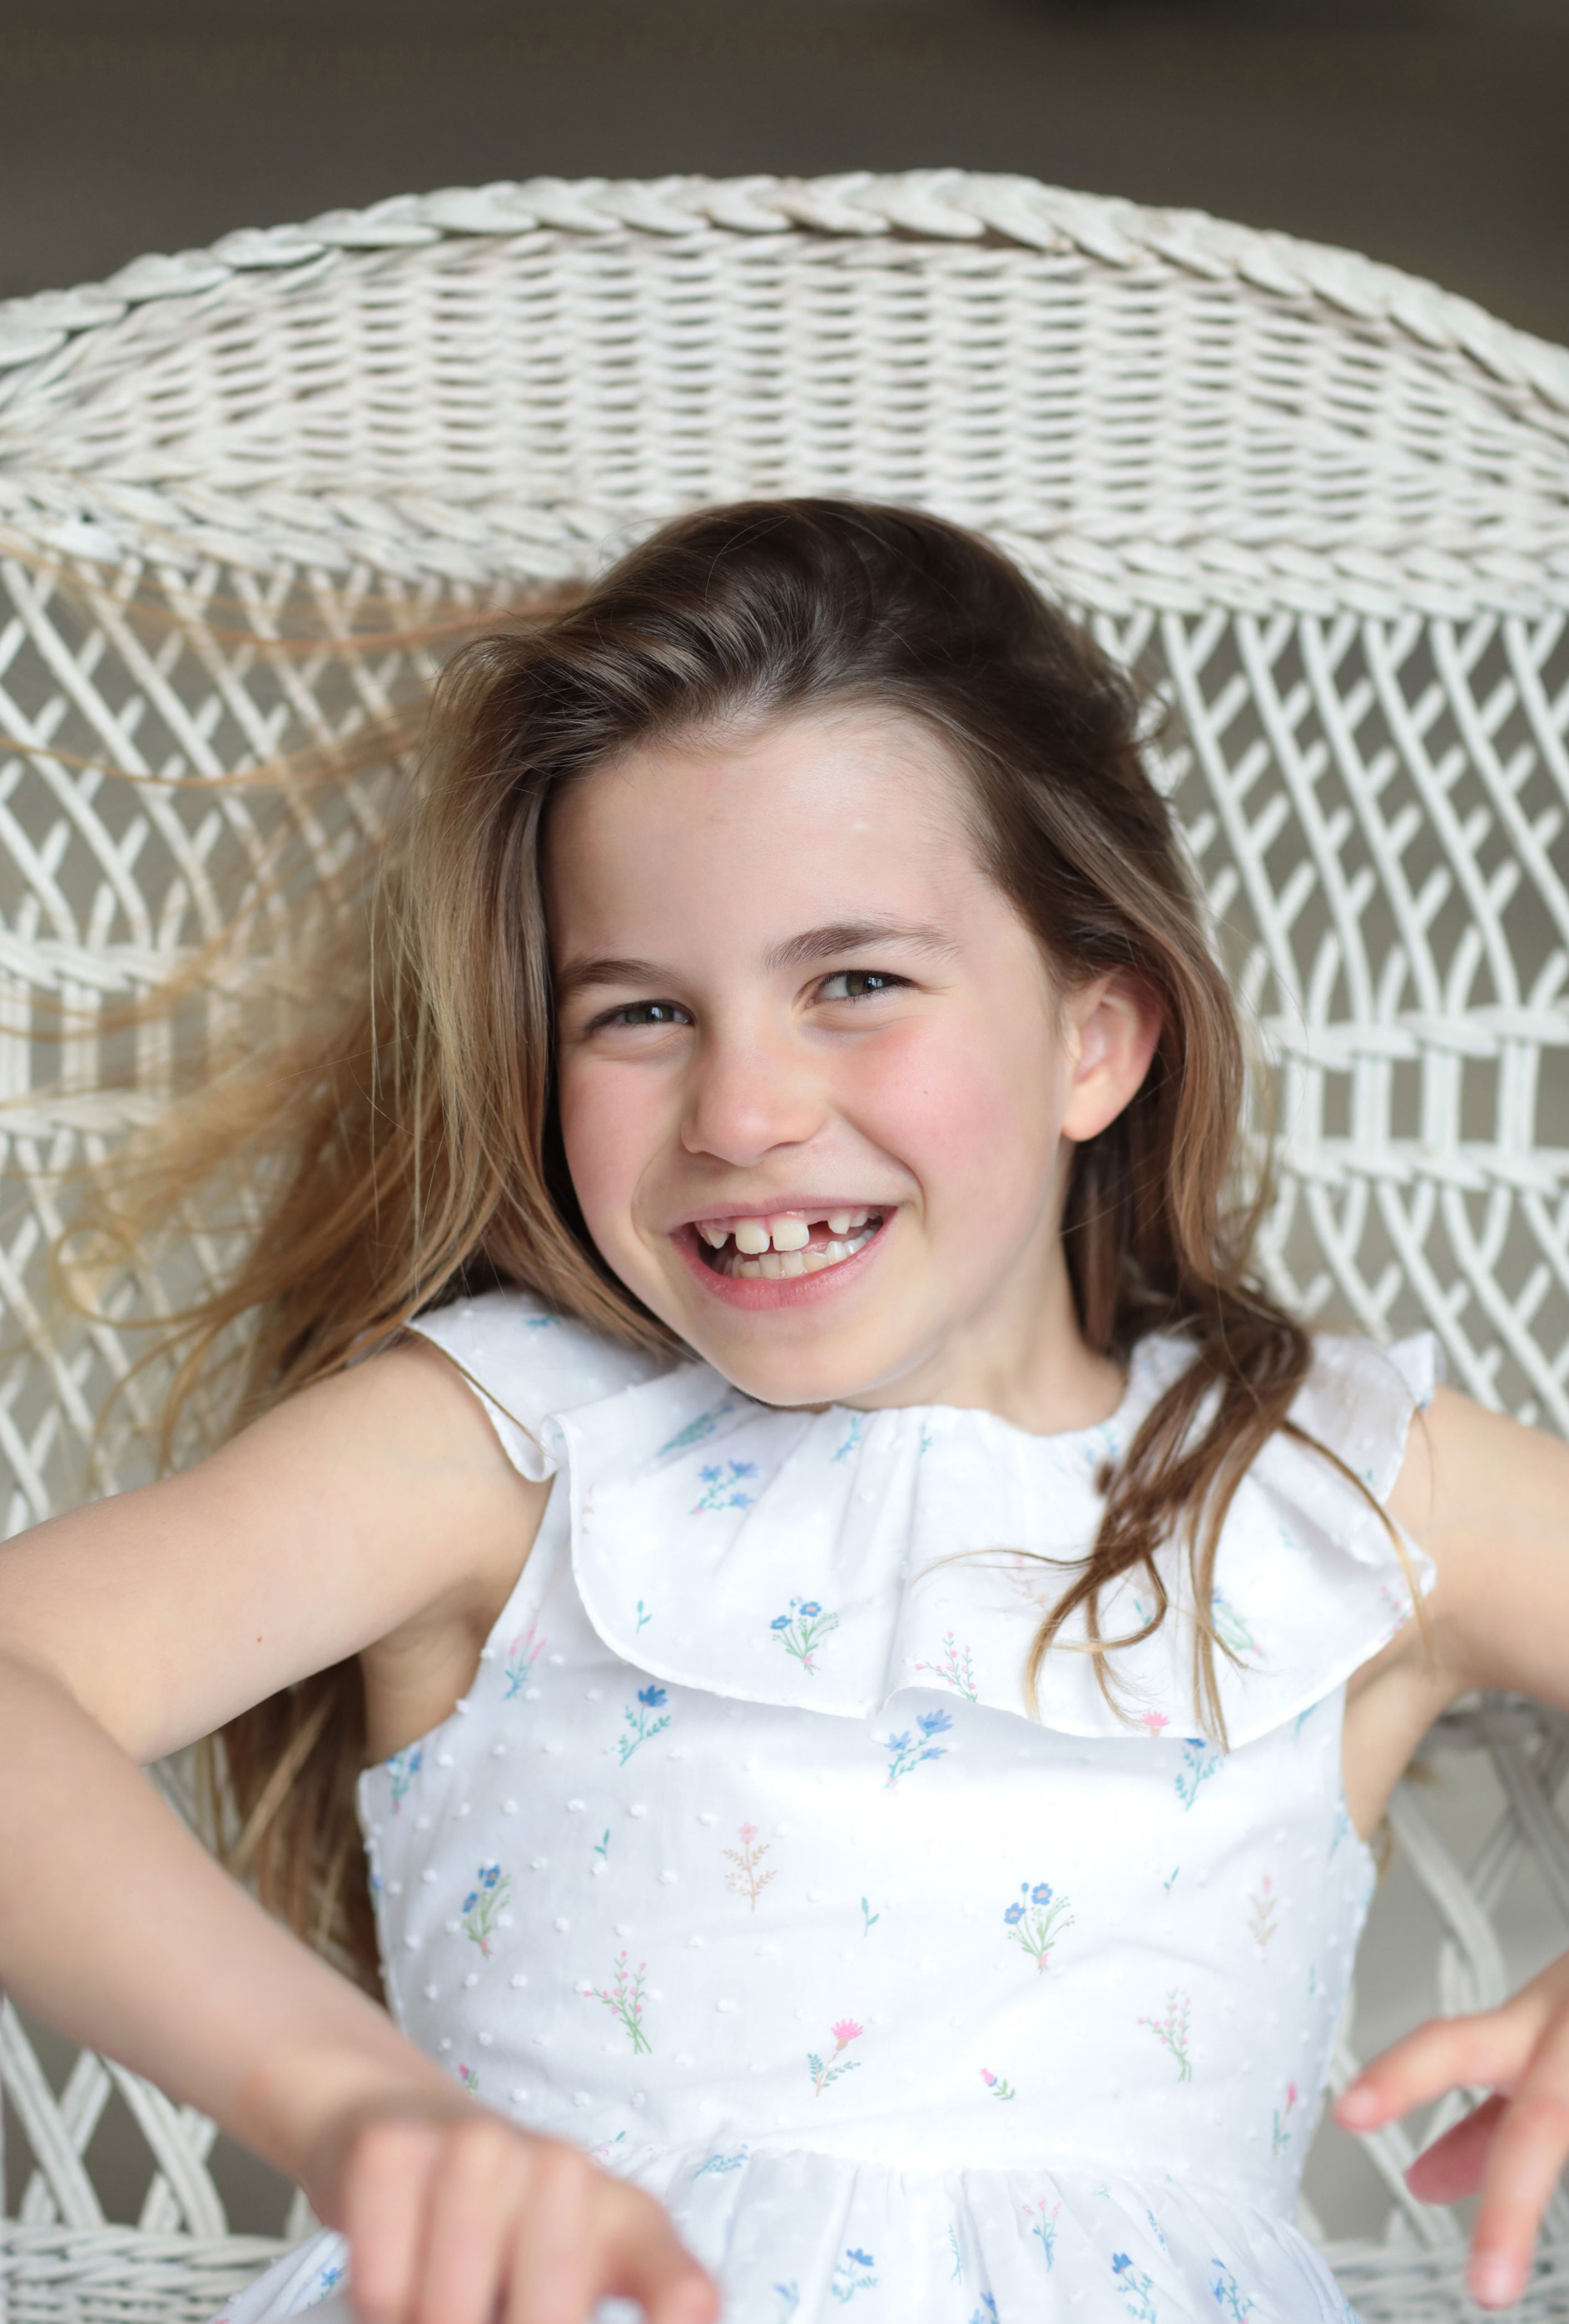 <p><span>Kensington Palace released this photo of Princess Charlotte of Wales to mark her 8th birthday on May 2, 2023. The portrait was taken by her mother, Princess Kate, in Windsor, England, the weekend before the young royal's birthday.</span></p>